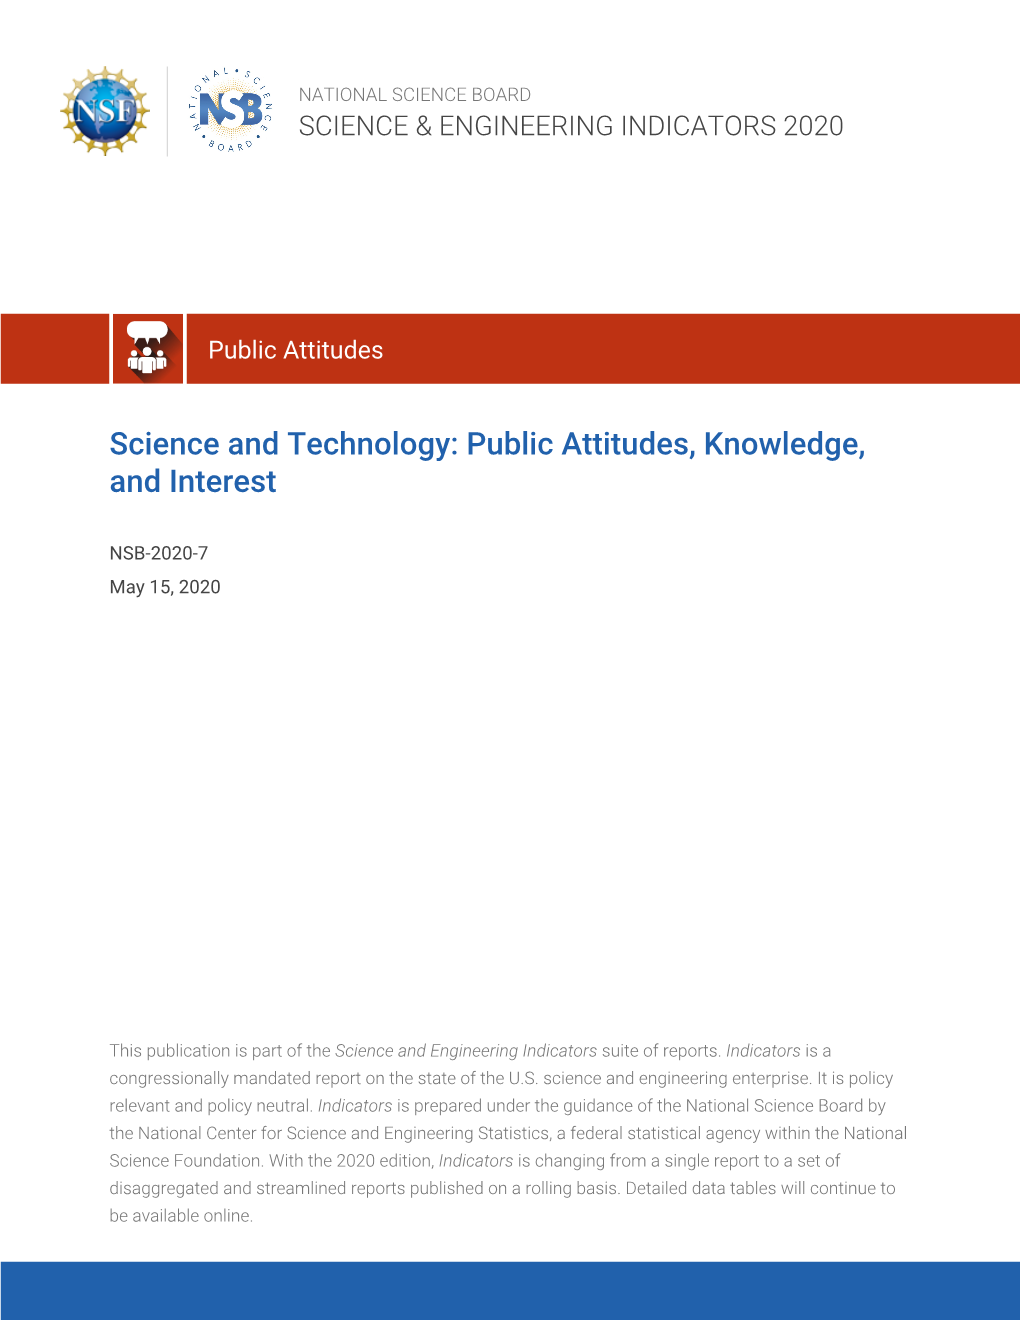 NSB-2020-7, Science and Technology: Public Attitudes, Knowledge, And